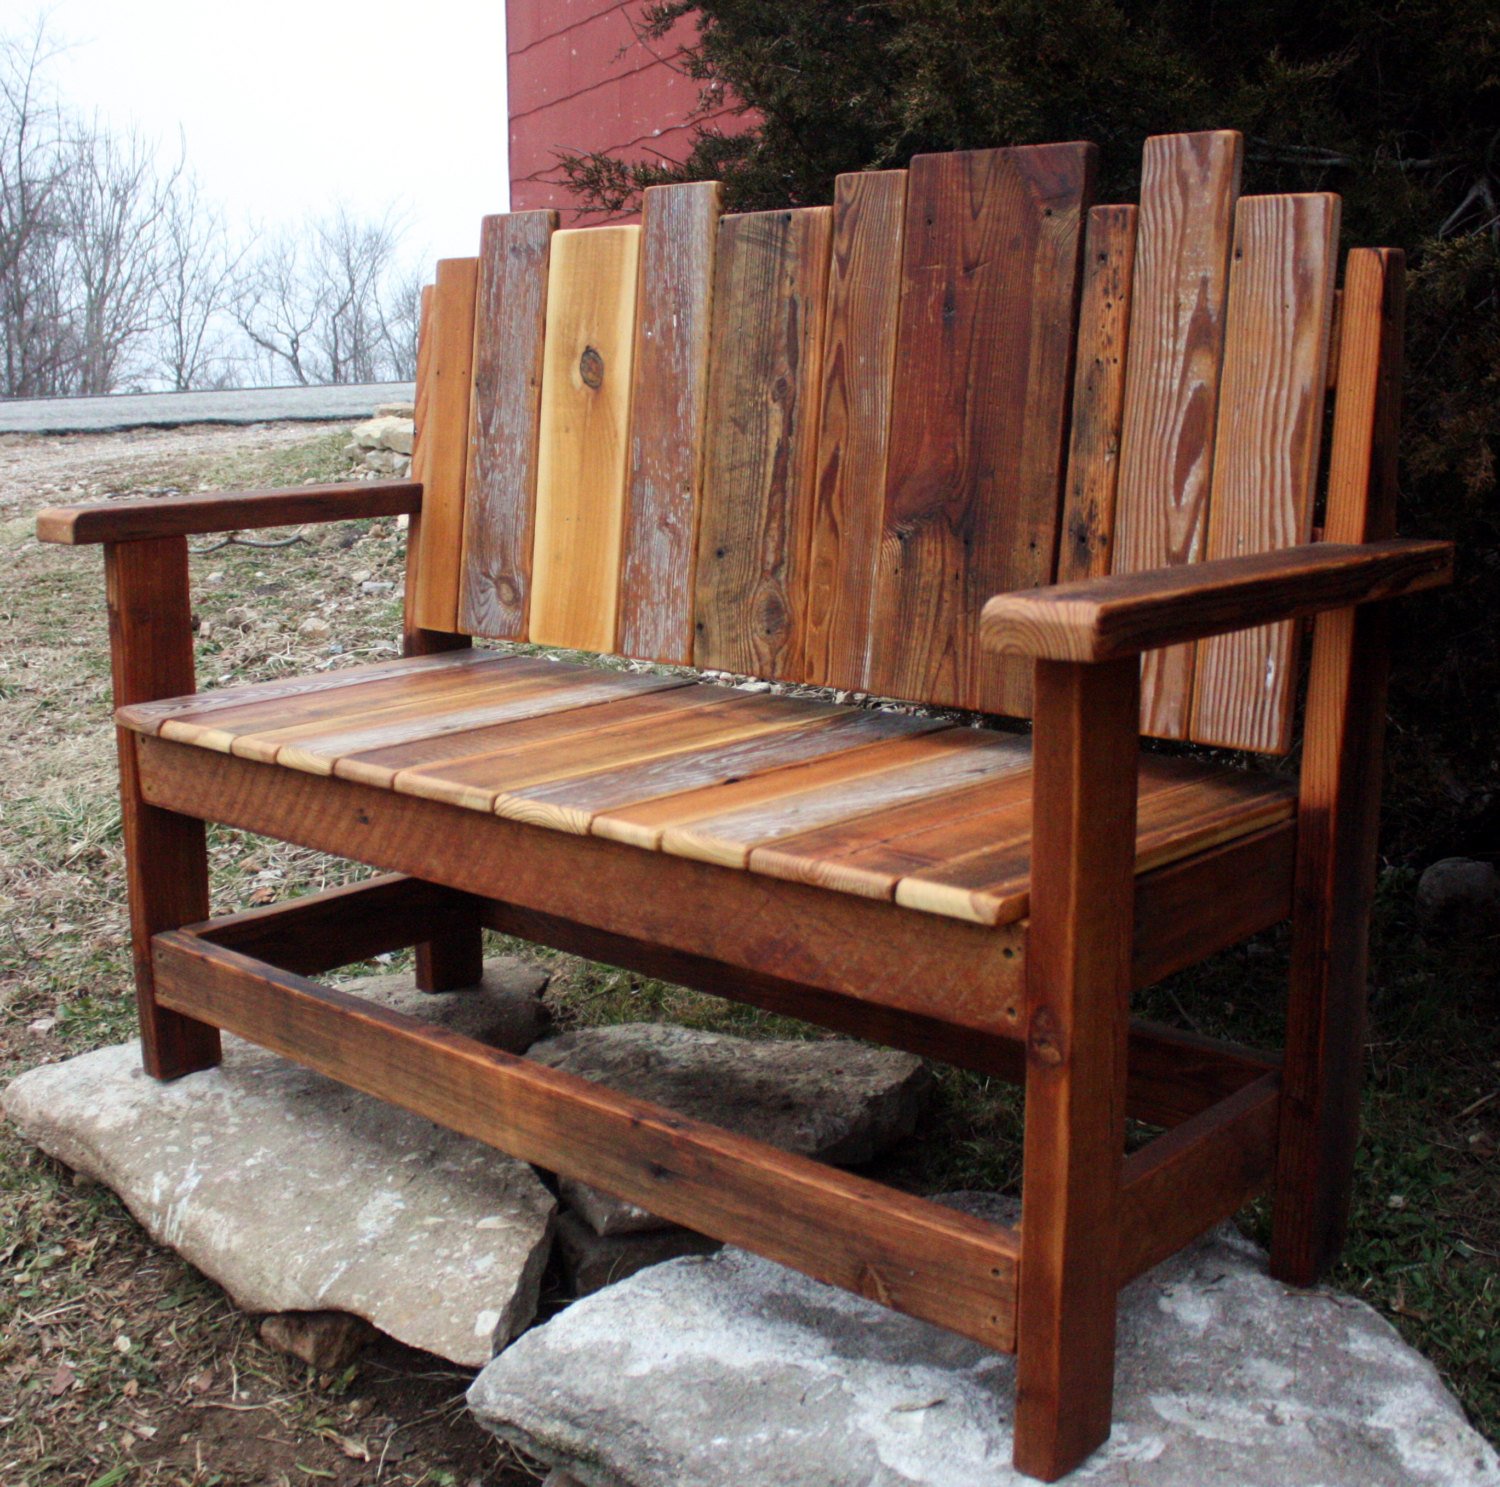  Bench besides Garden Table Plans. on rustic pine furniture plans